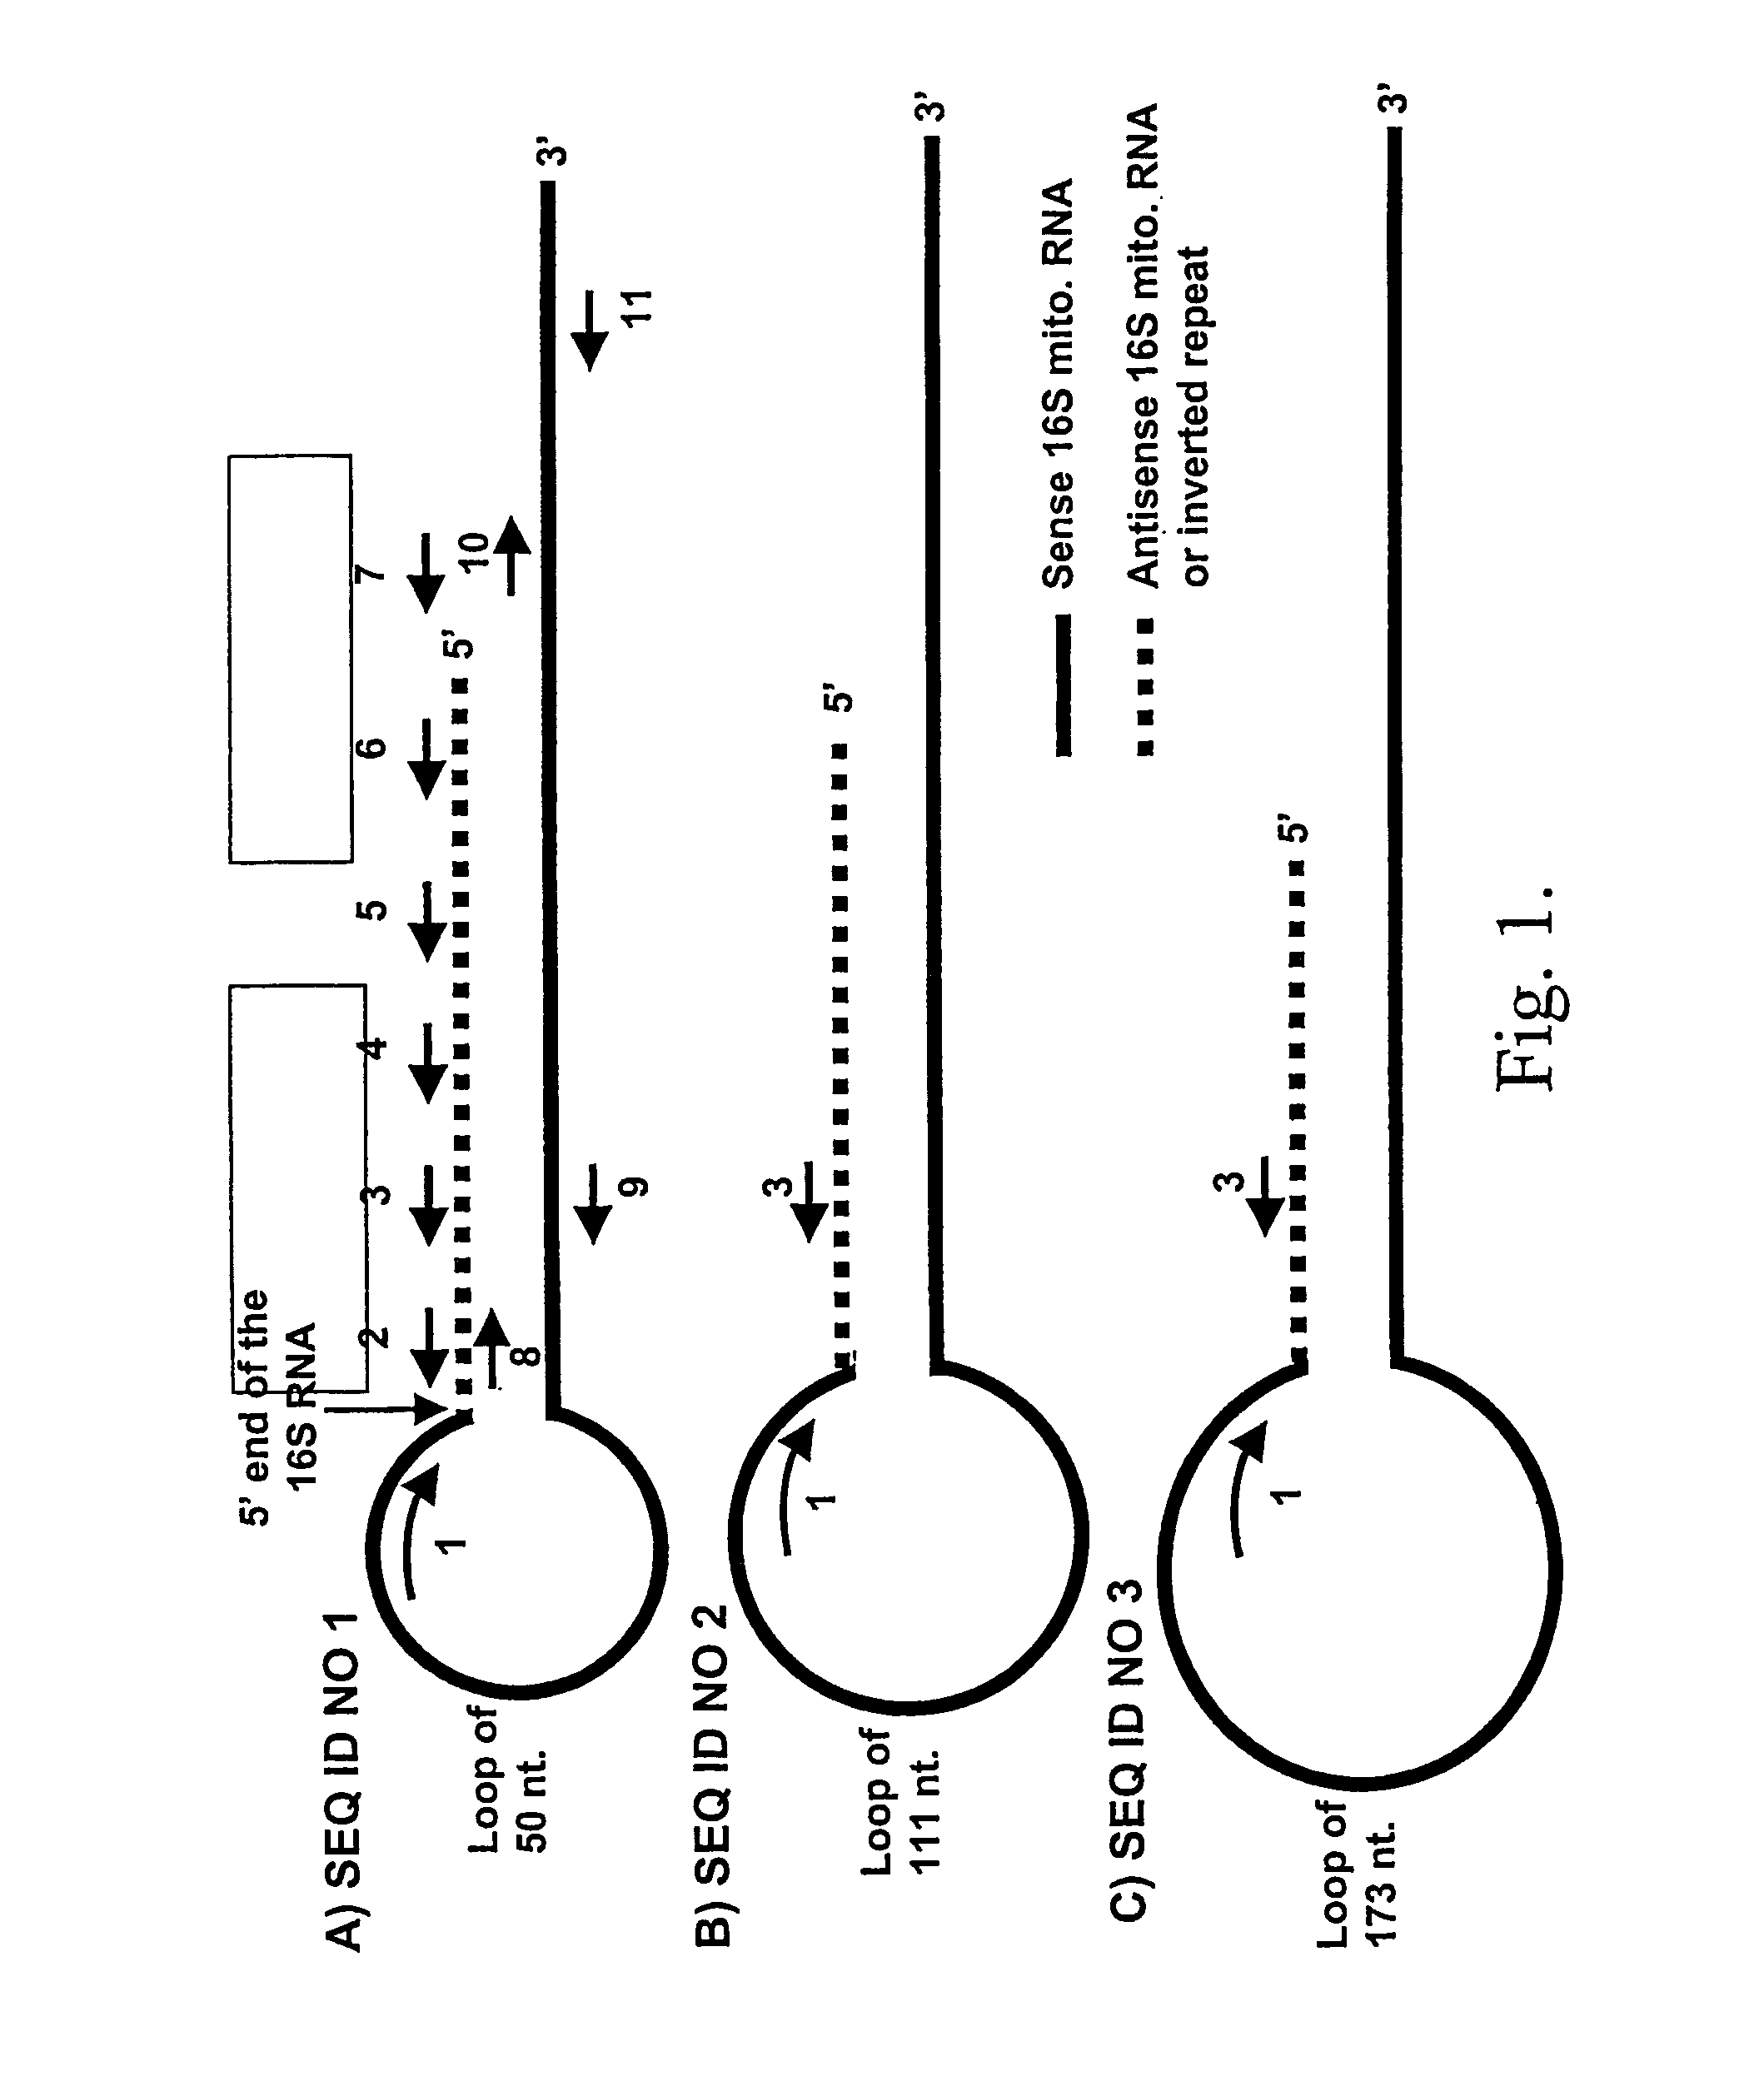 Markers for pre-cancer and cancer cells and the method to interfere with cell proliferation therein